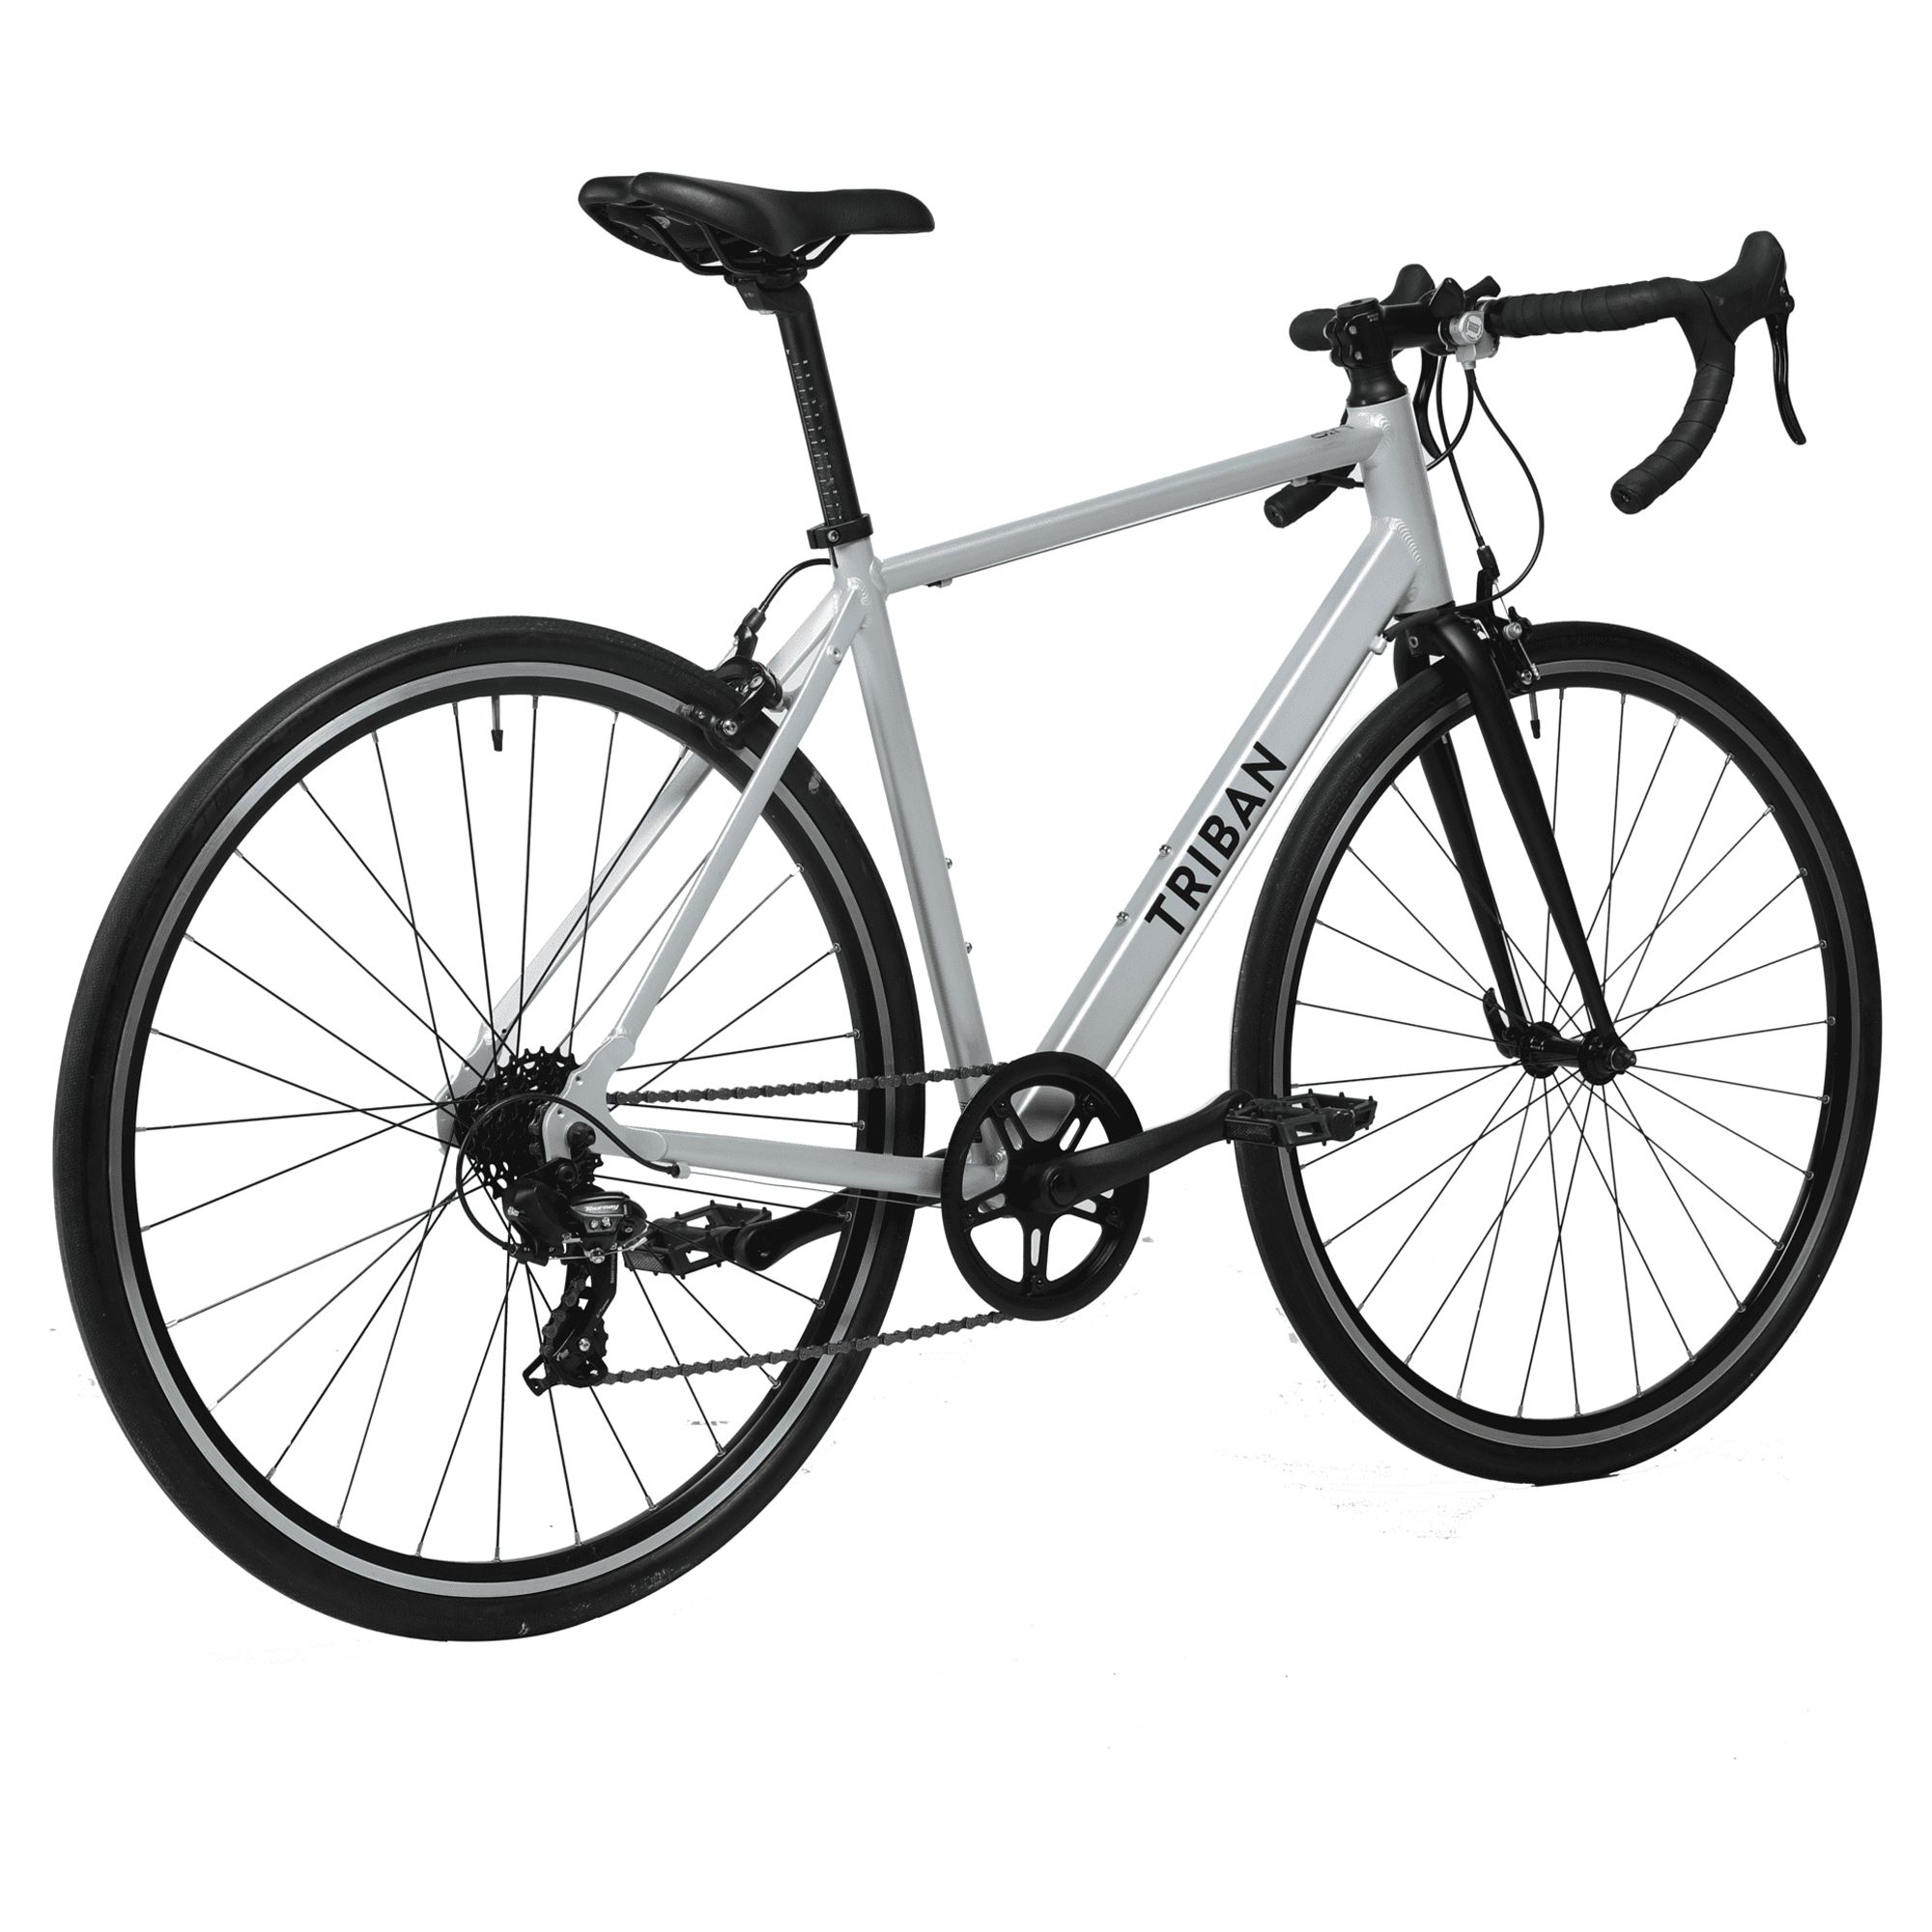 Decathlon Triban Abyss RC100, Aluminum Road Bike, 700c, 7 Speed, Silver, Small - image 4 of 6